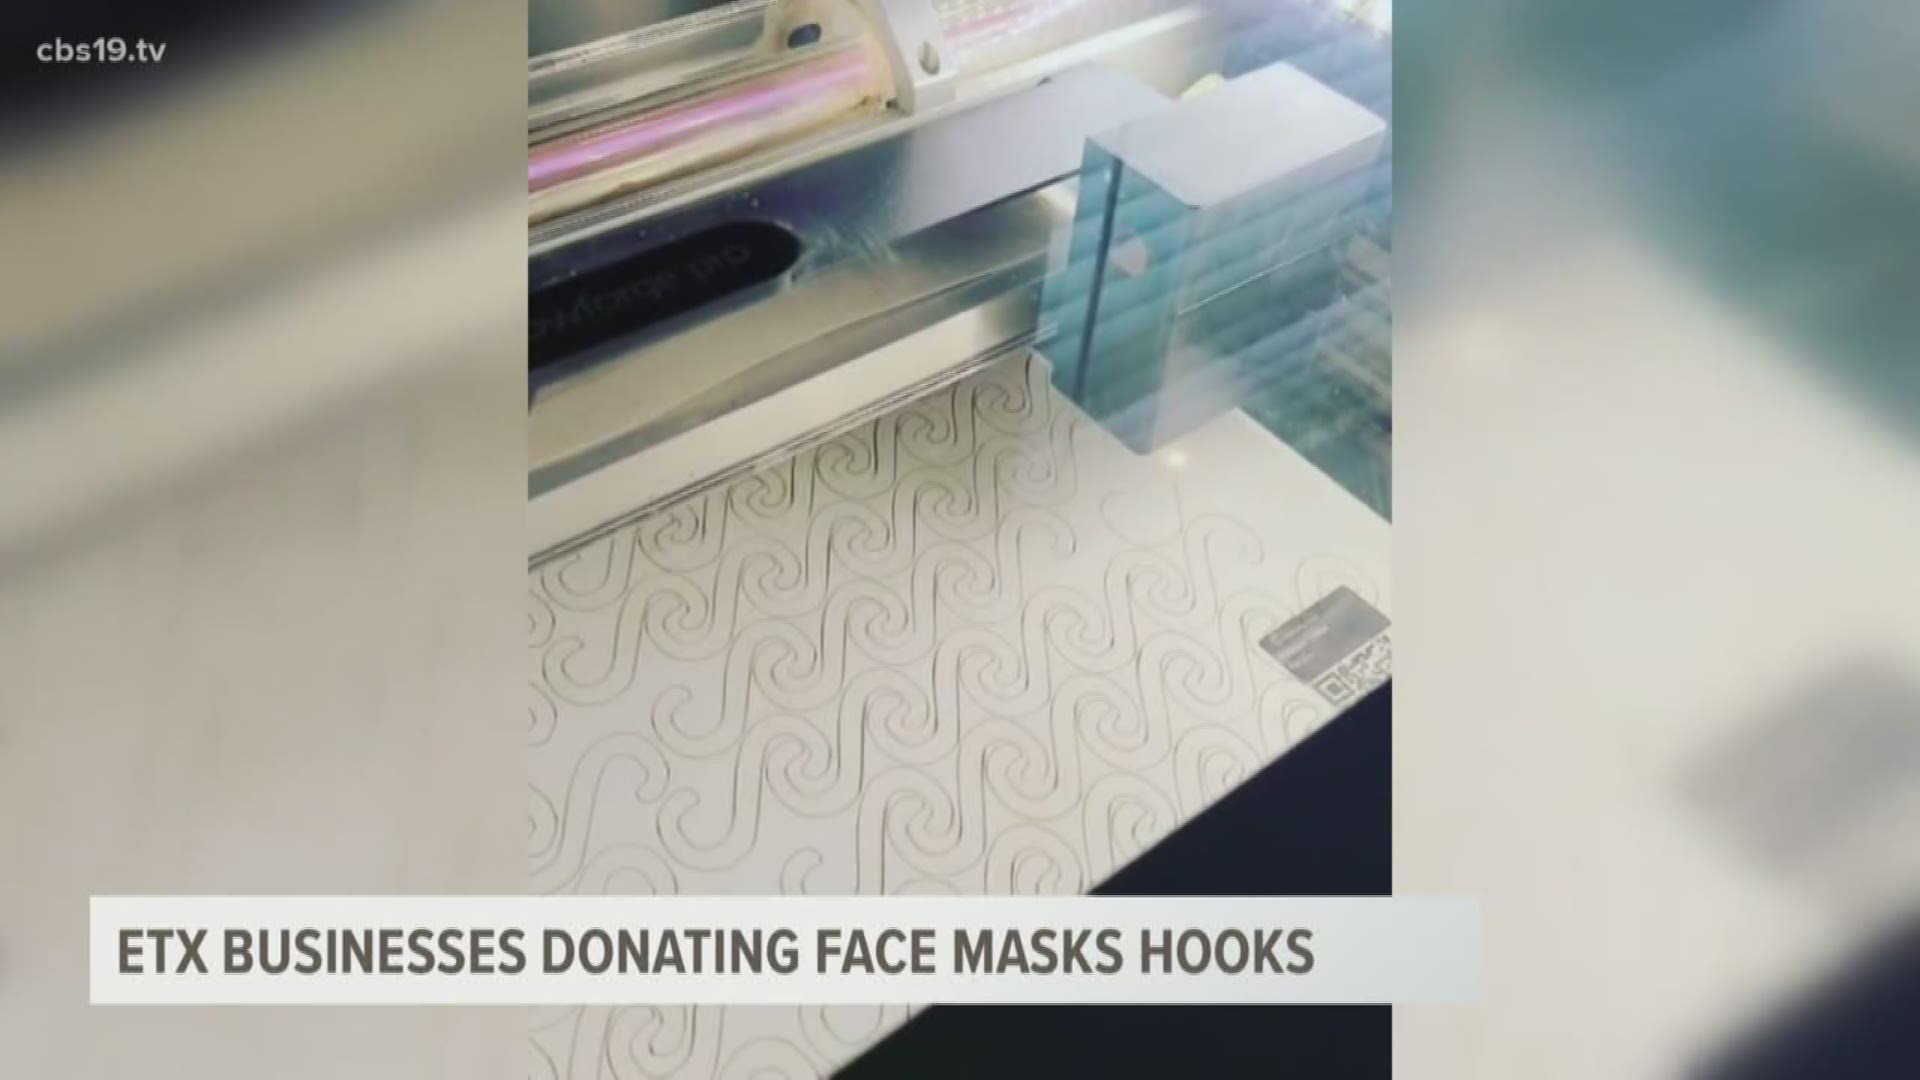 East Texas business donating face masks hooks to healthcare workers